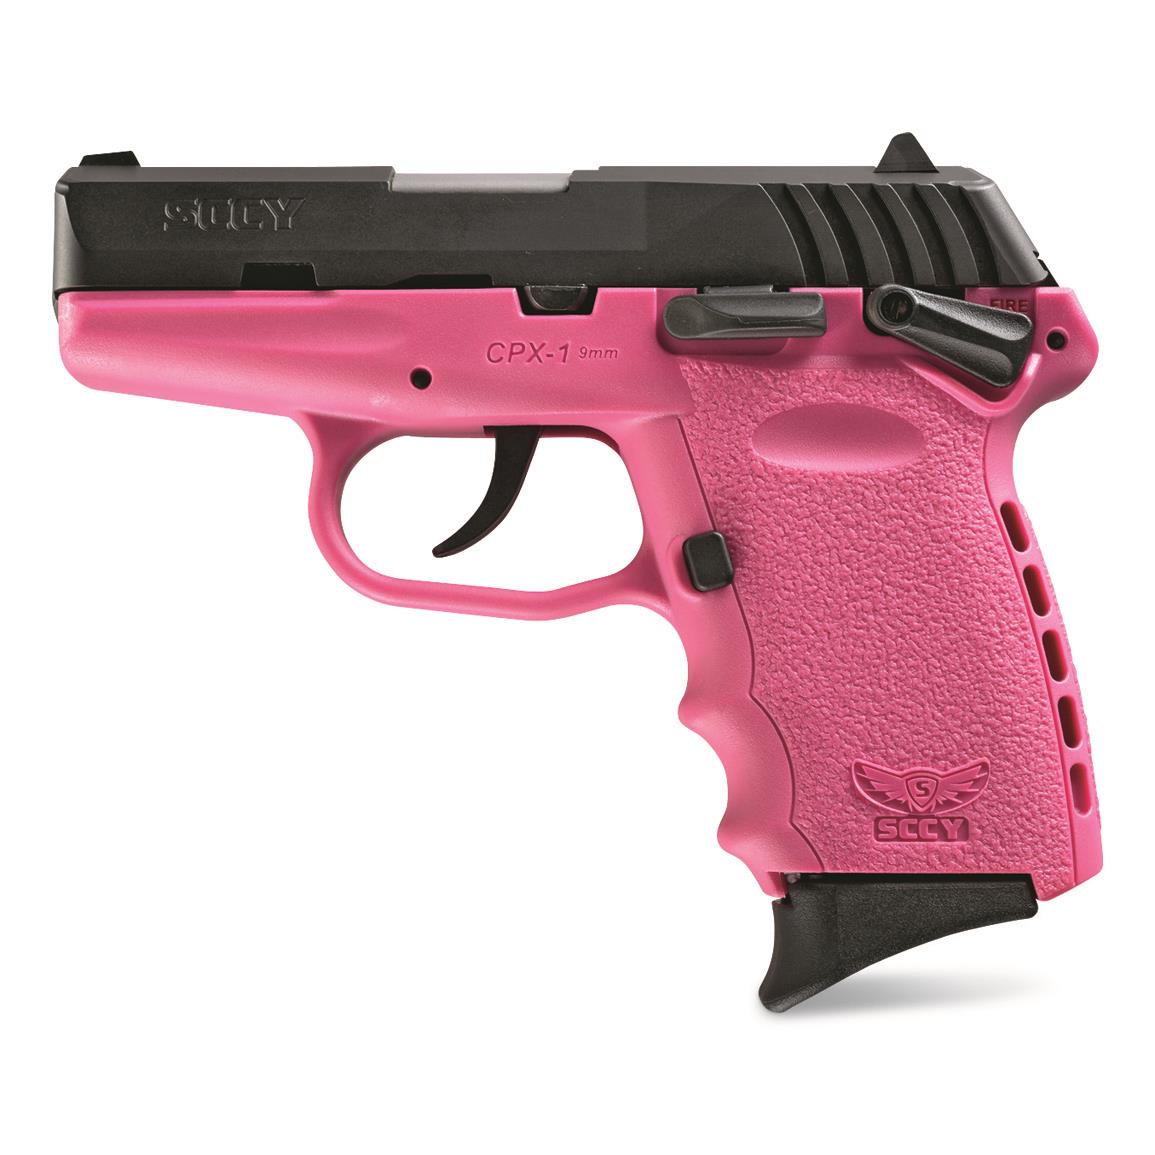 SCCY CPX-1, Semi-automatic, 9mm, 3.1" Barrel, Pink/Black Nitride, 10+1 Rounds